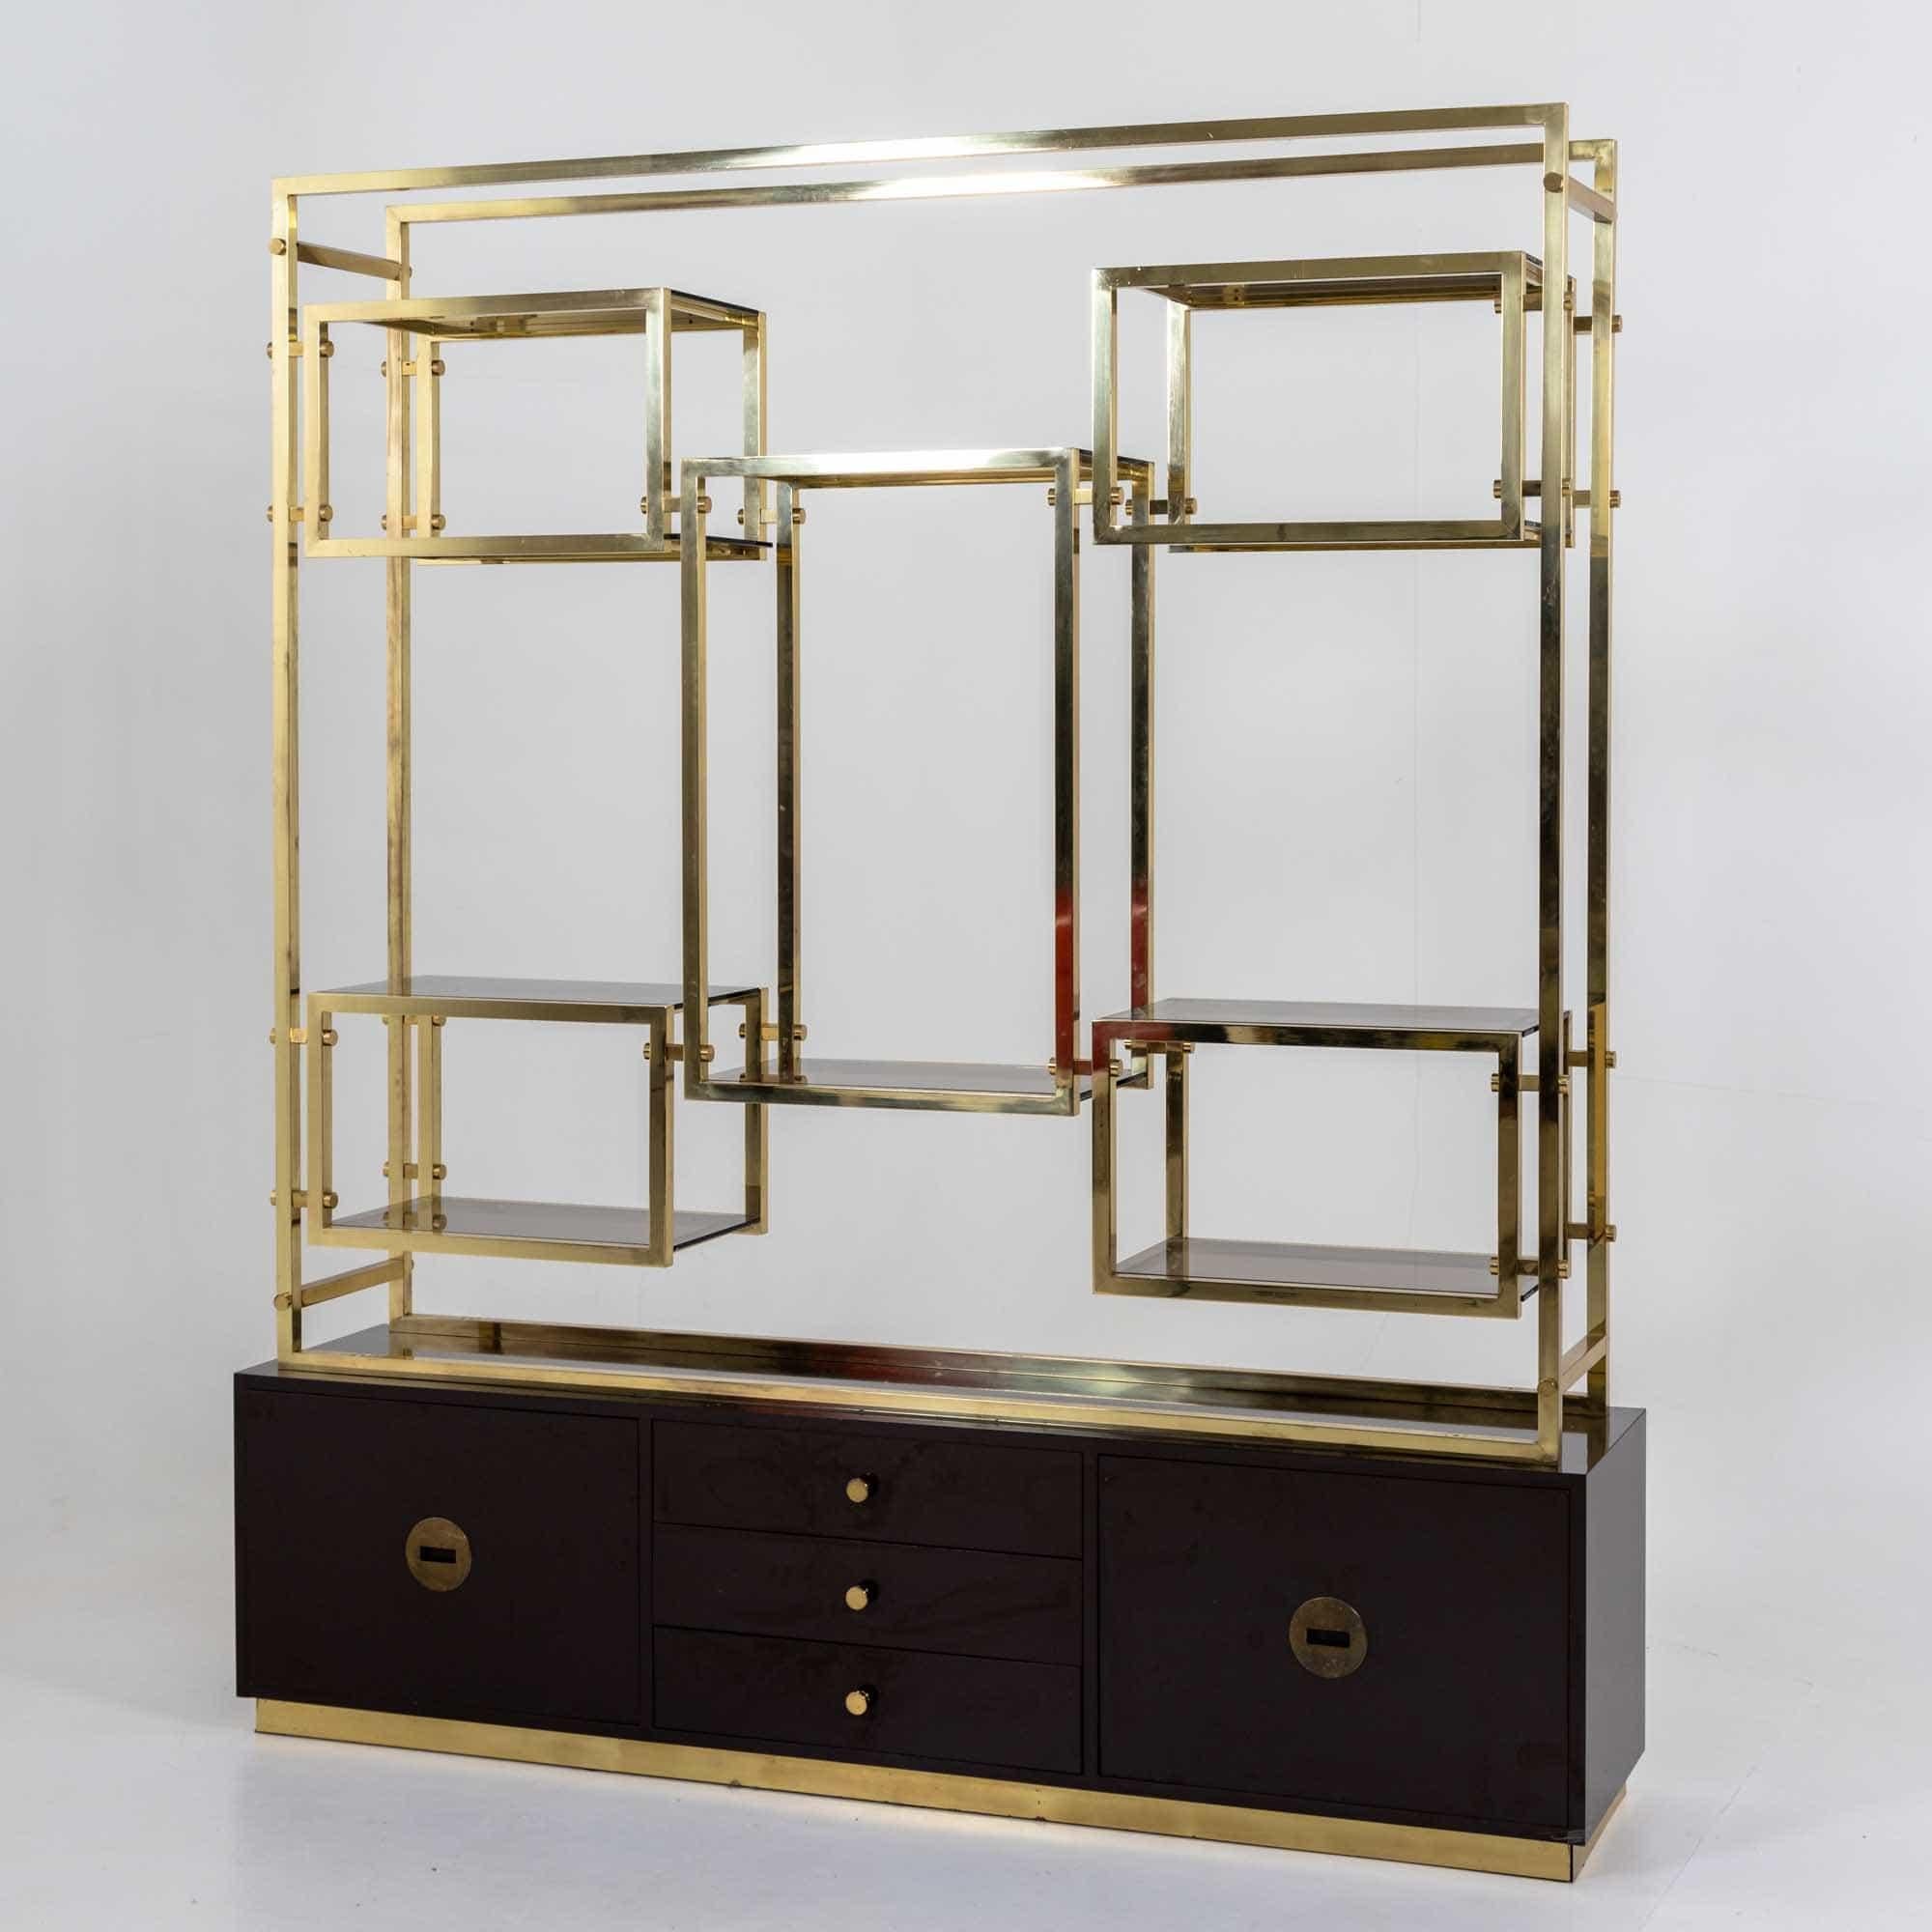 Large room divider shelf made of brass with a dark brown lacquered base with three drawers and two doors. The symmetrically designed shelf unit is fitted with smoked glass shelves and has a shelf depth of 32.5 cm.